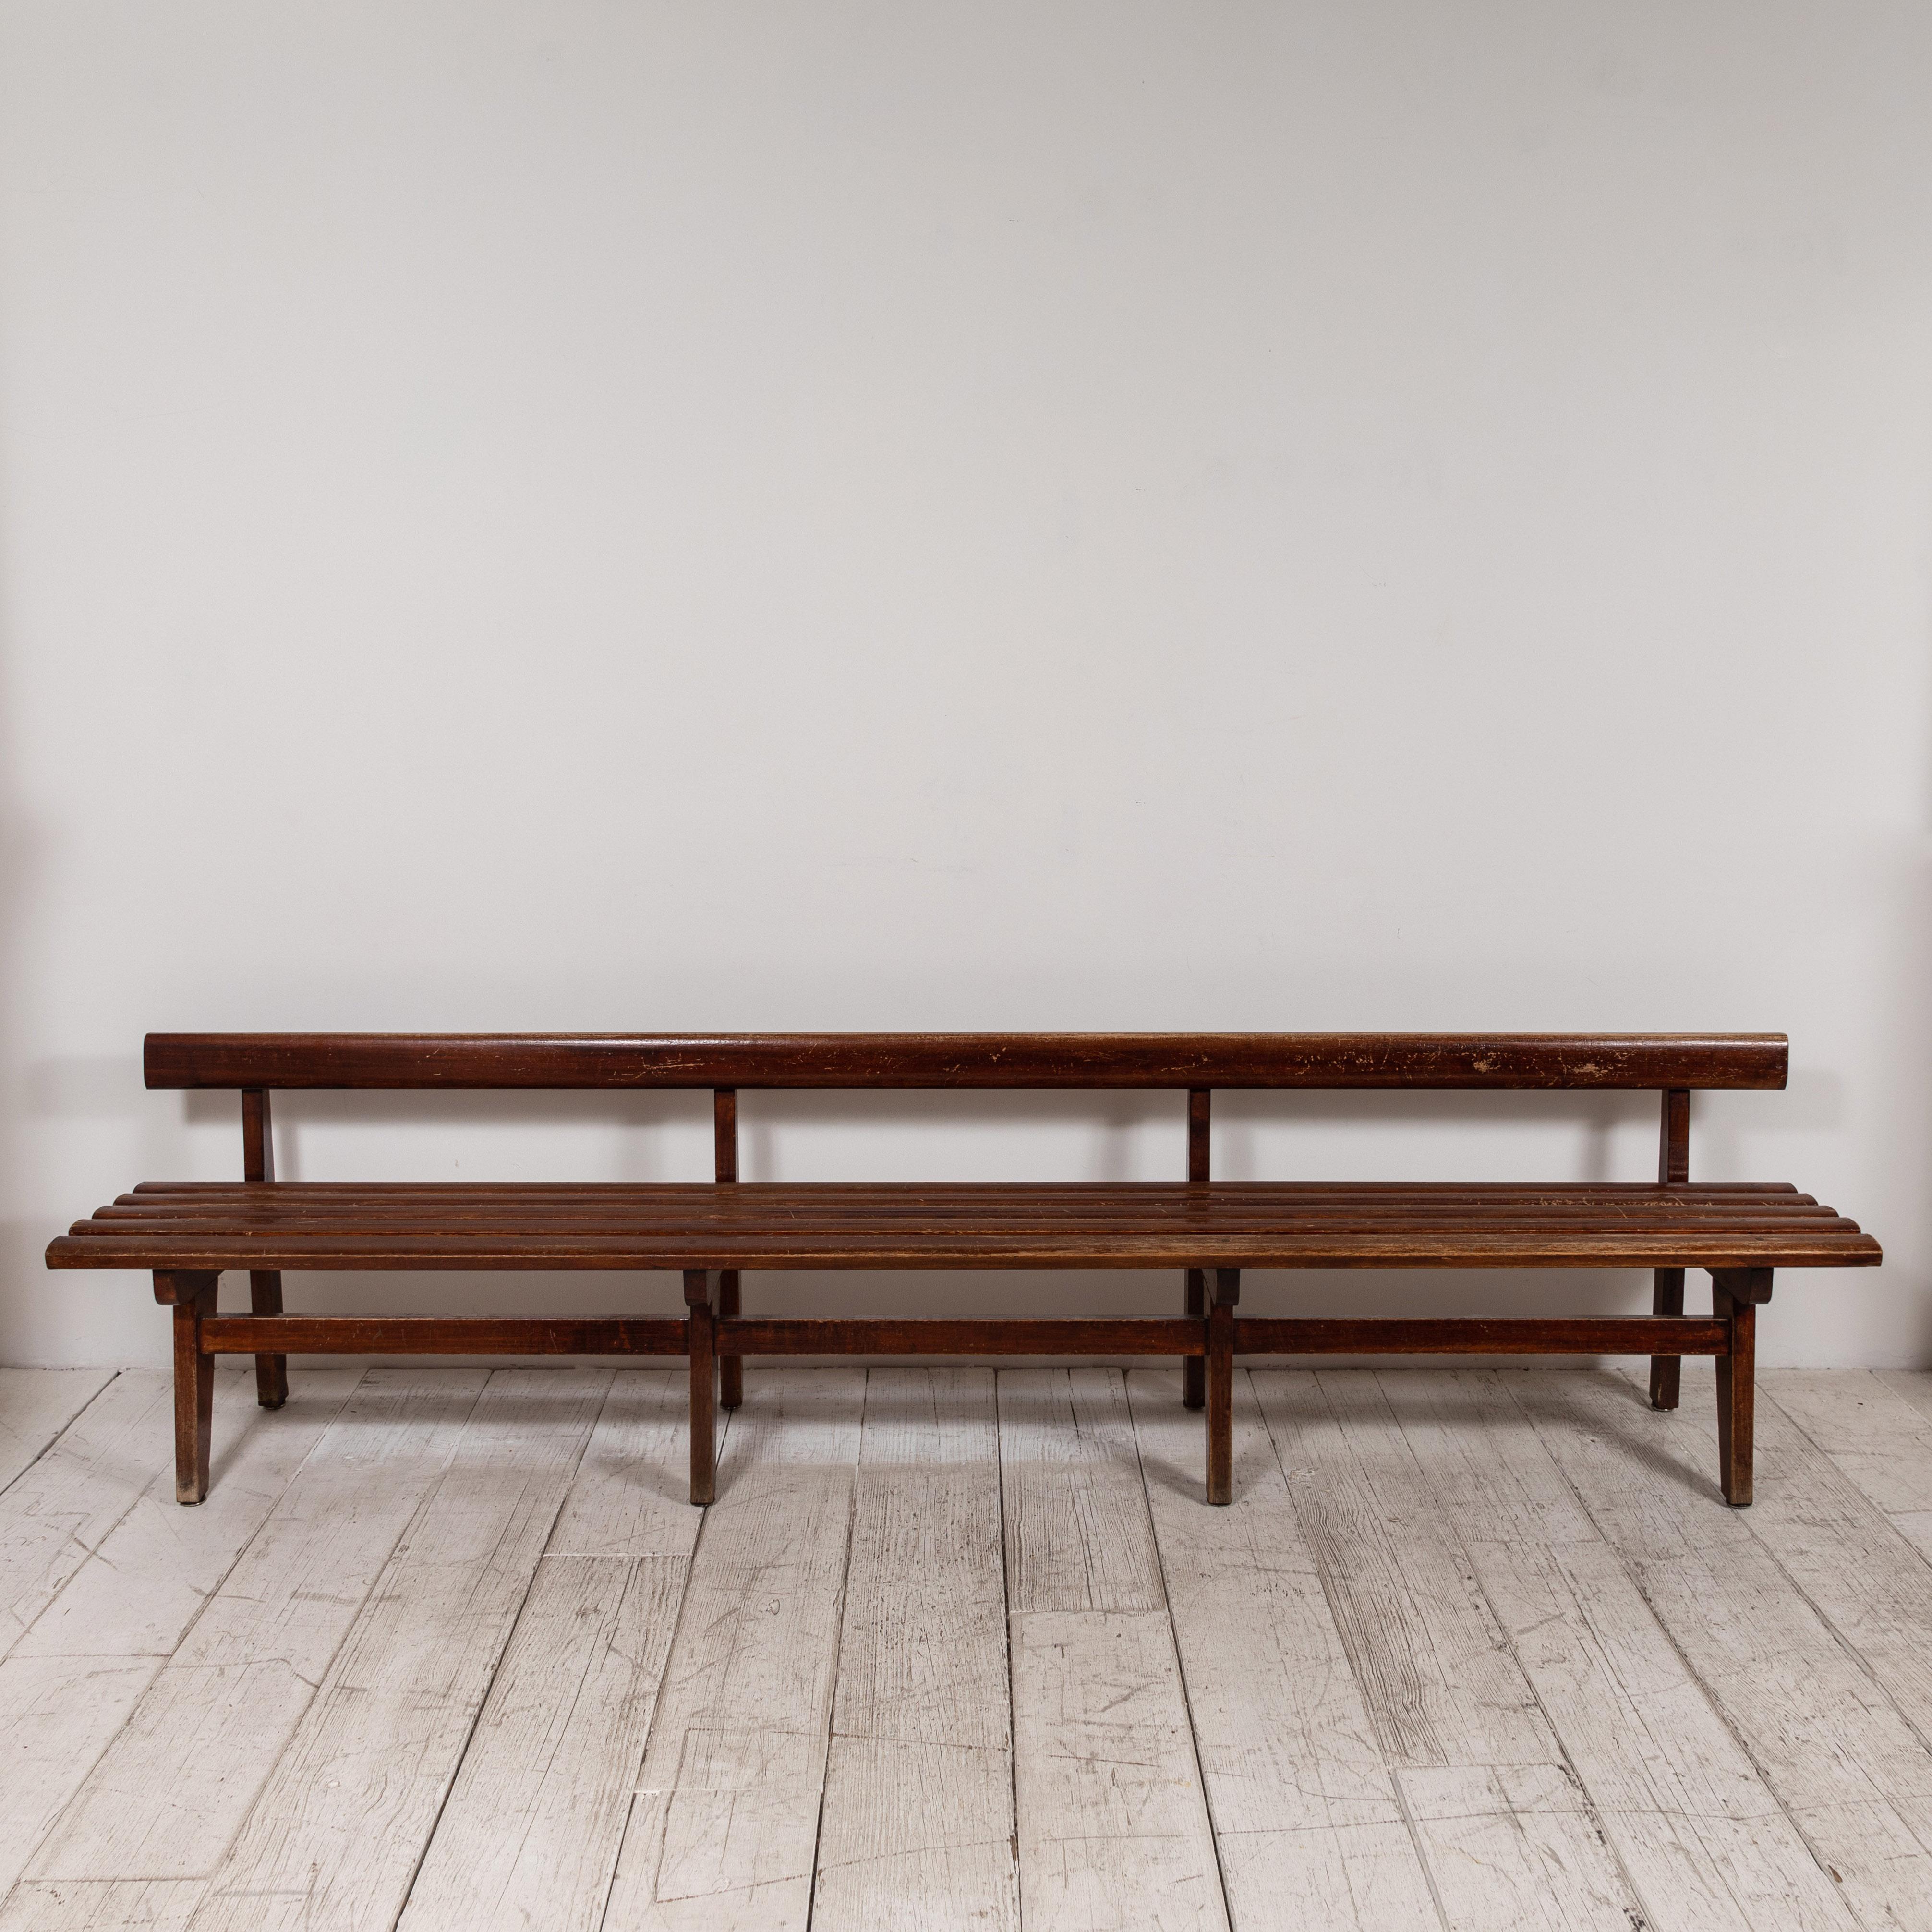 Long and low, this French slatted wooden bench is perfect for any hallway or room that has the space.